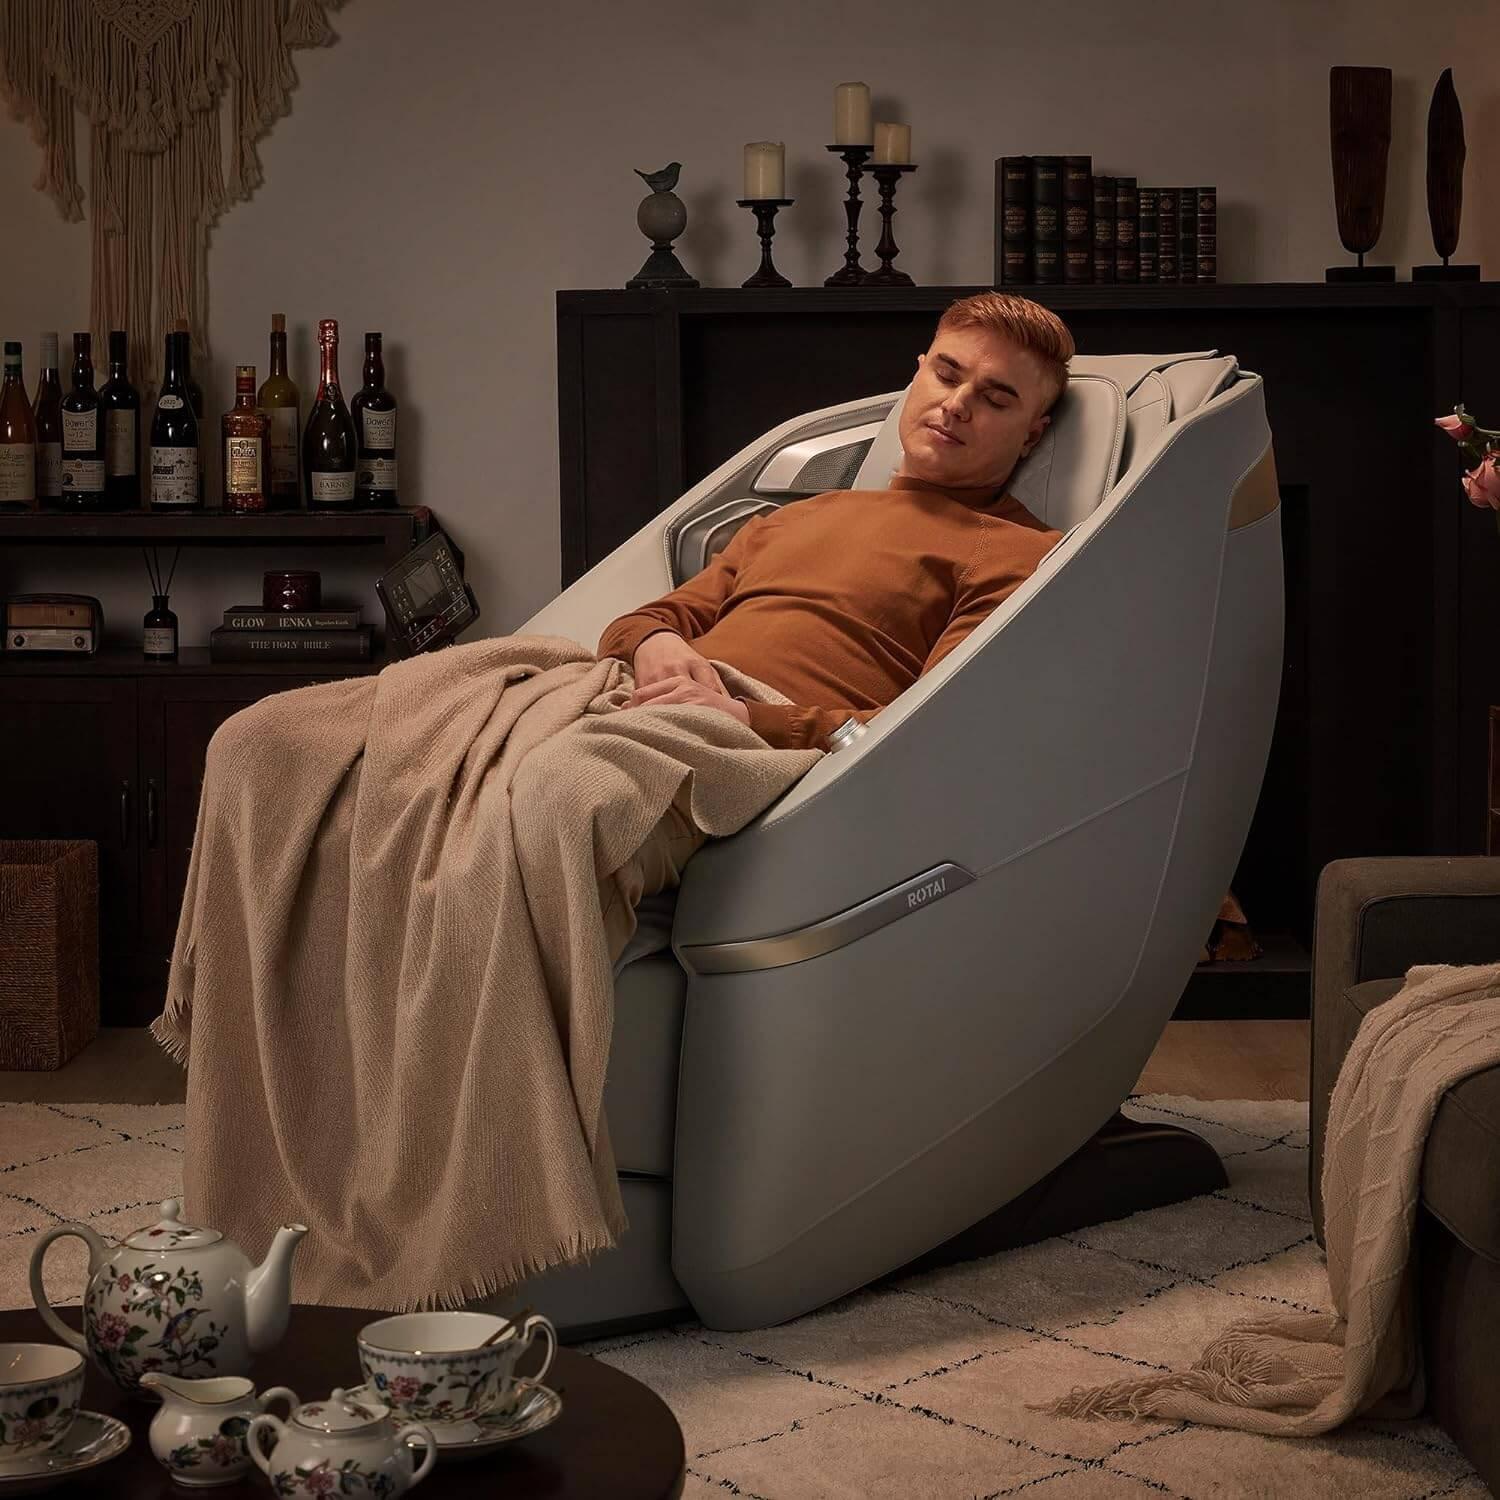 Man relaxing in Ekanite massage chair and sofa in cozy living room with a blanket, showcasing tablet control and foot massager features.